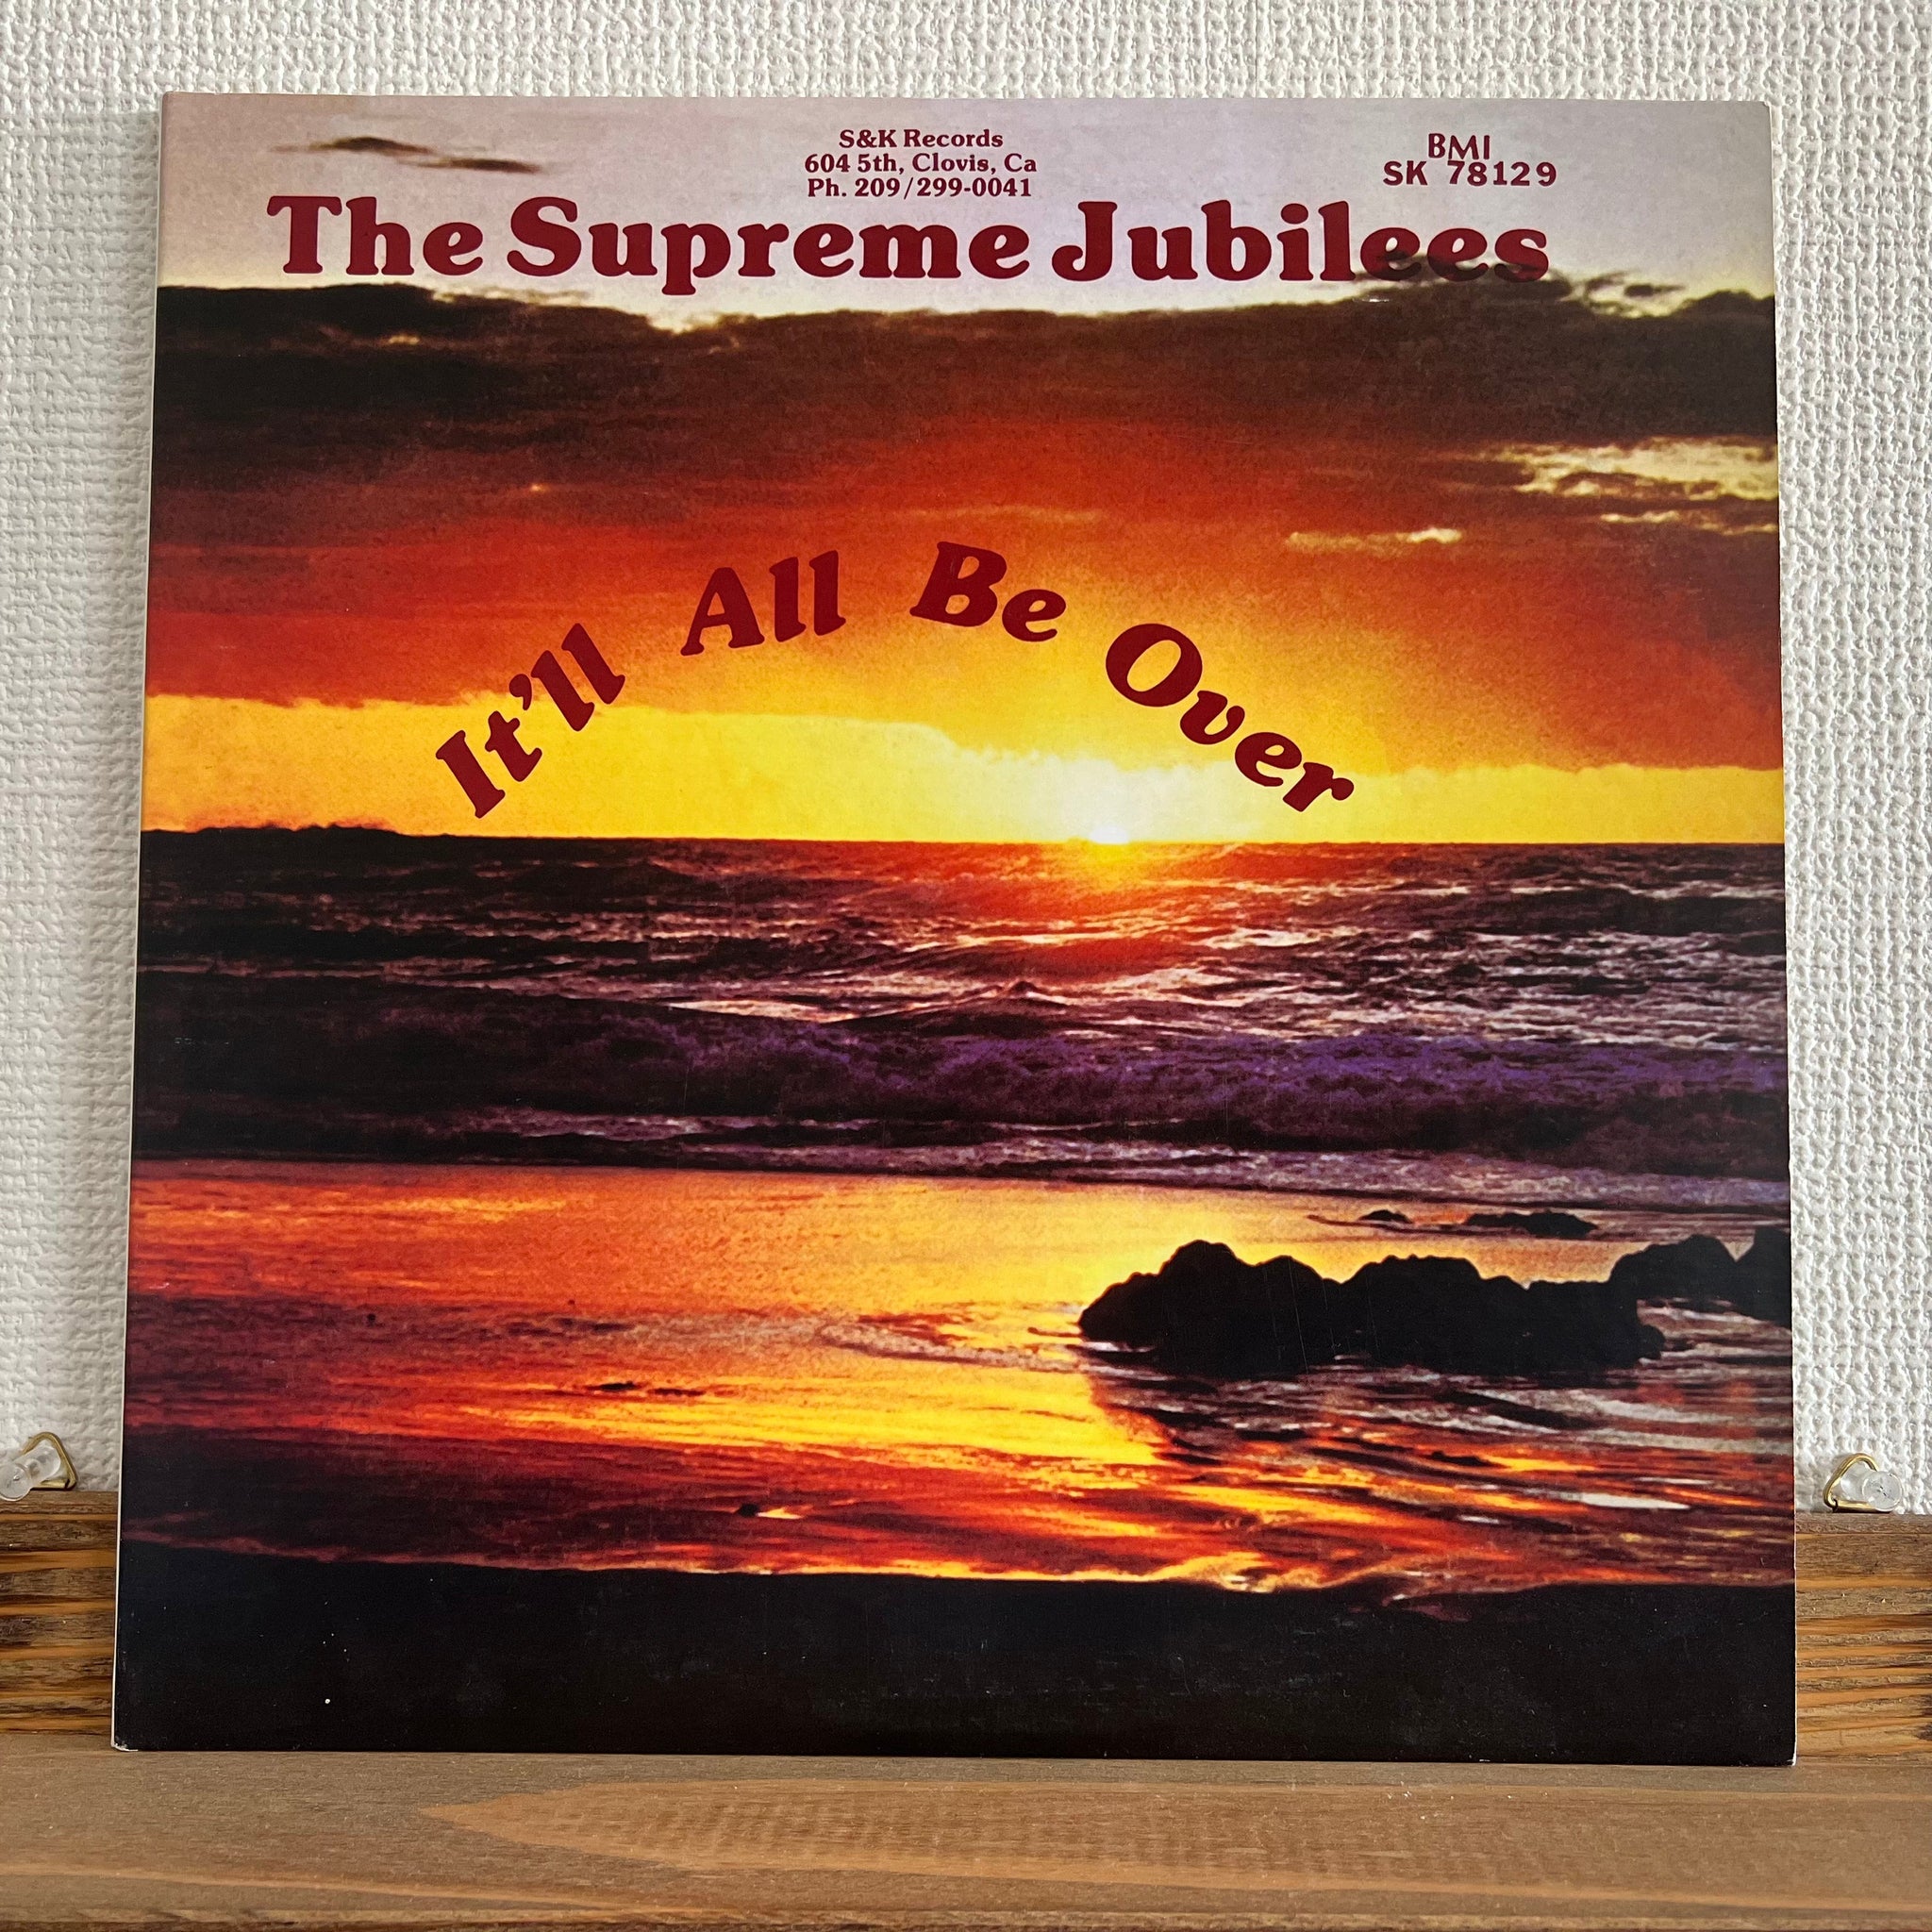 The Supreme Jubilees - It'll All Be Over